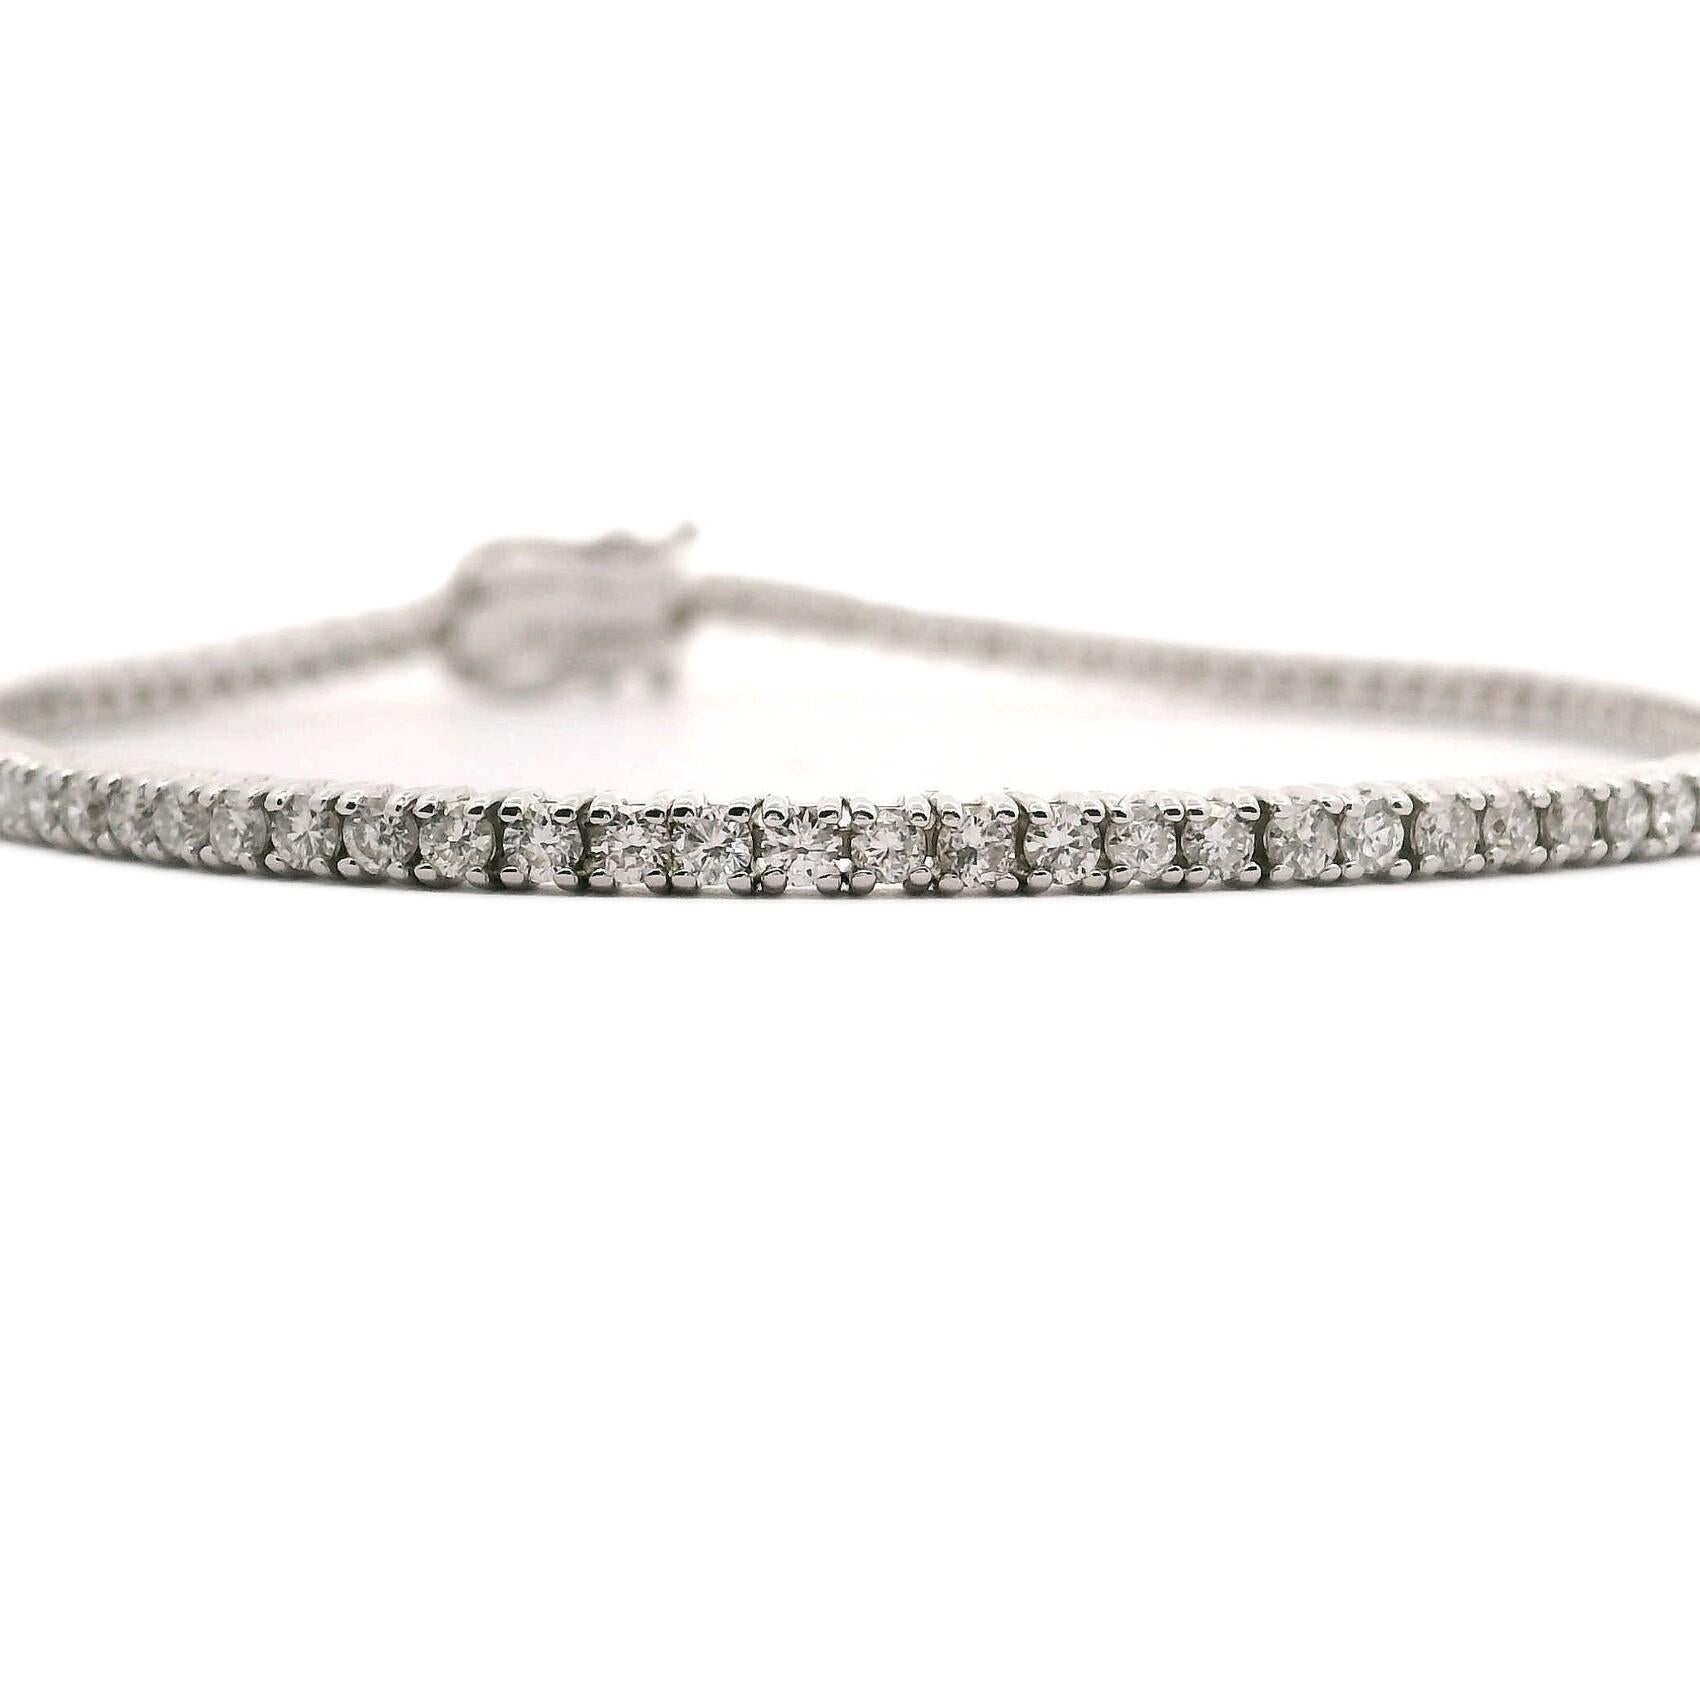 Condition:  Brand New
Metal:  14k White Gold
Weight:  7g
Length:  7 Inches
Width:  2.25mm
Diamonds:  Round Brilliant Diamonds 2cttw
Diamond Color and Clarity:  H-I and I1
Closure:  Box Tab Insert with Two Safety Latches
Markings:  